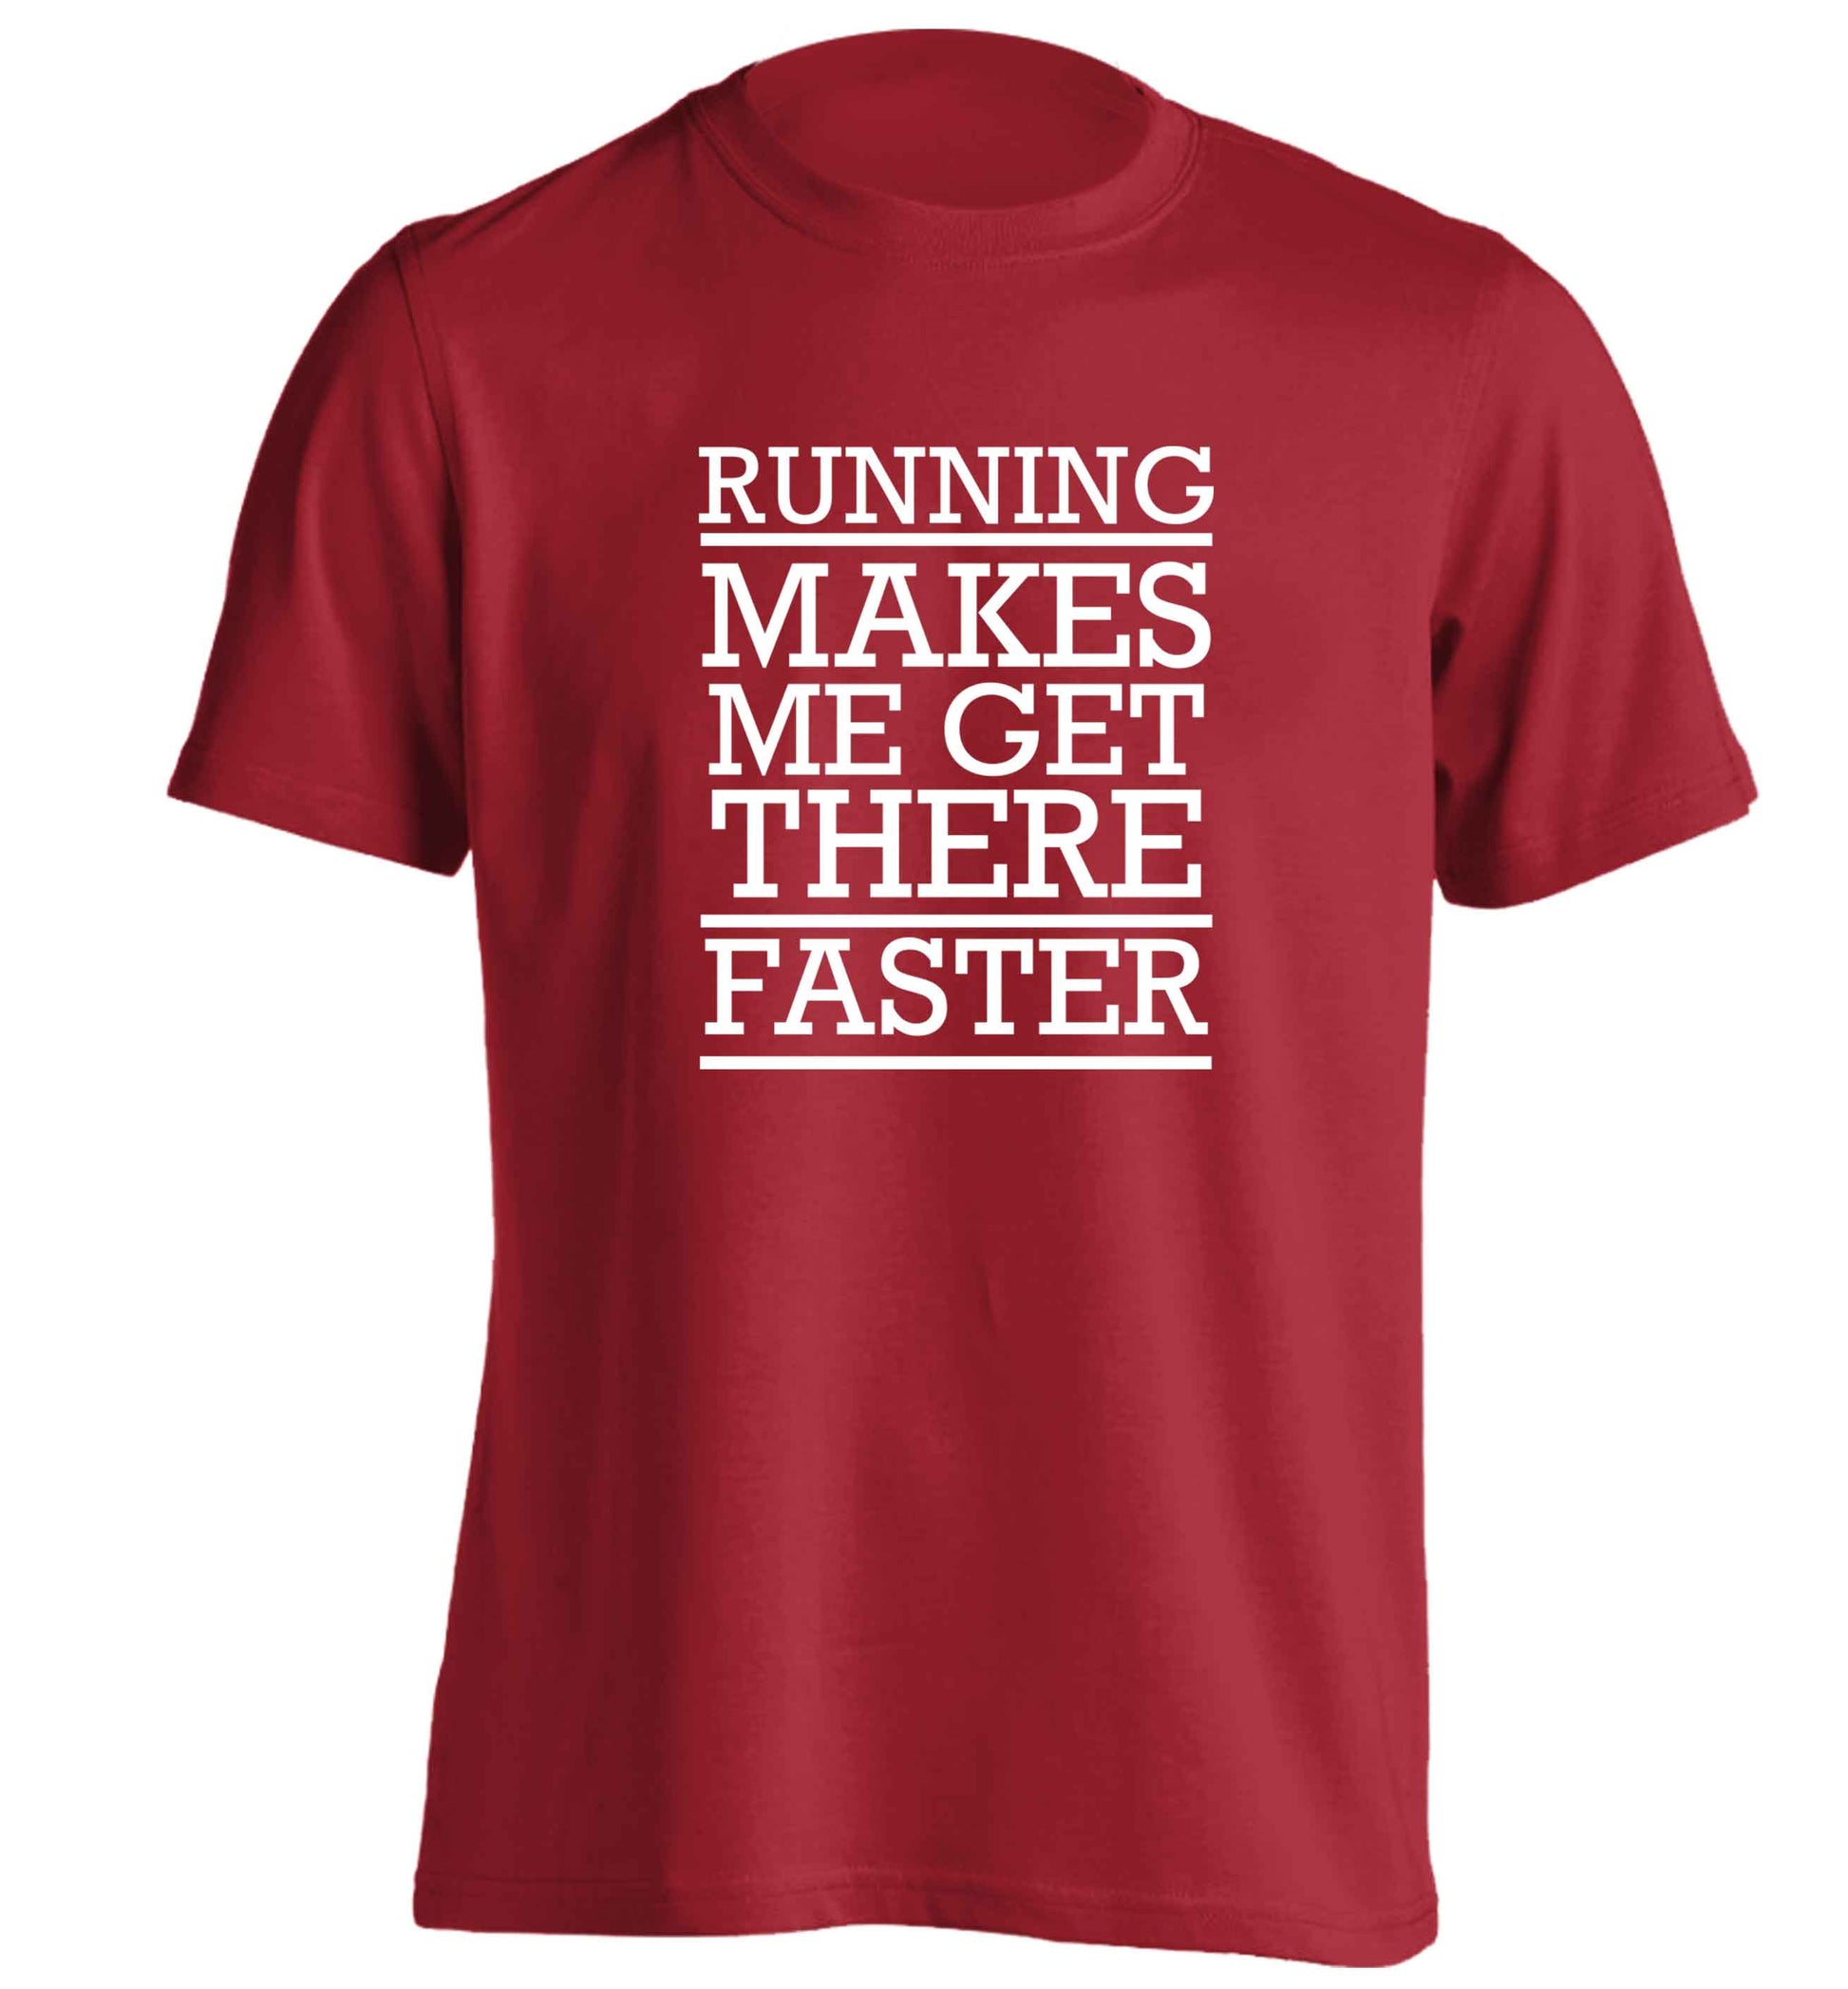 Running makes me get there faster adults unisex red Tshirt 2XL